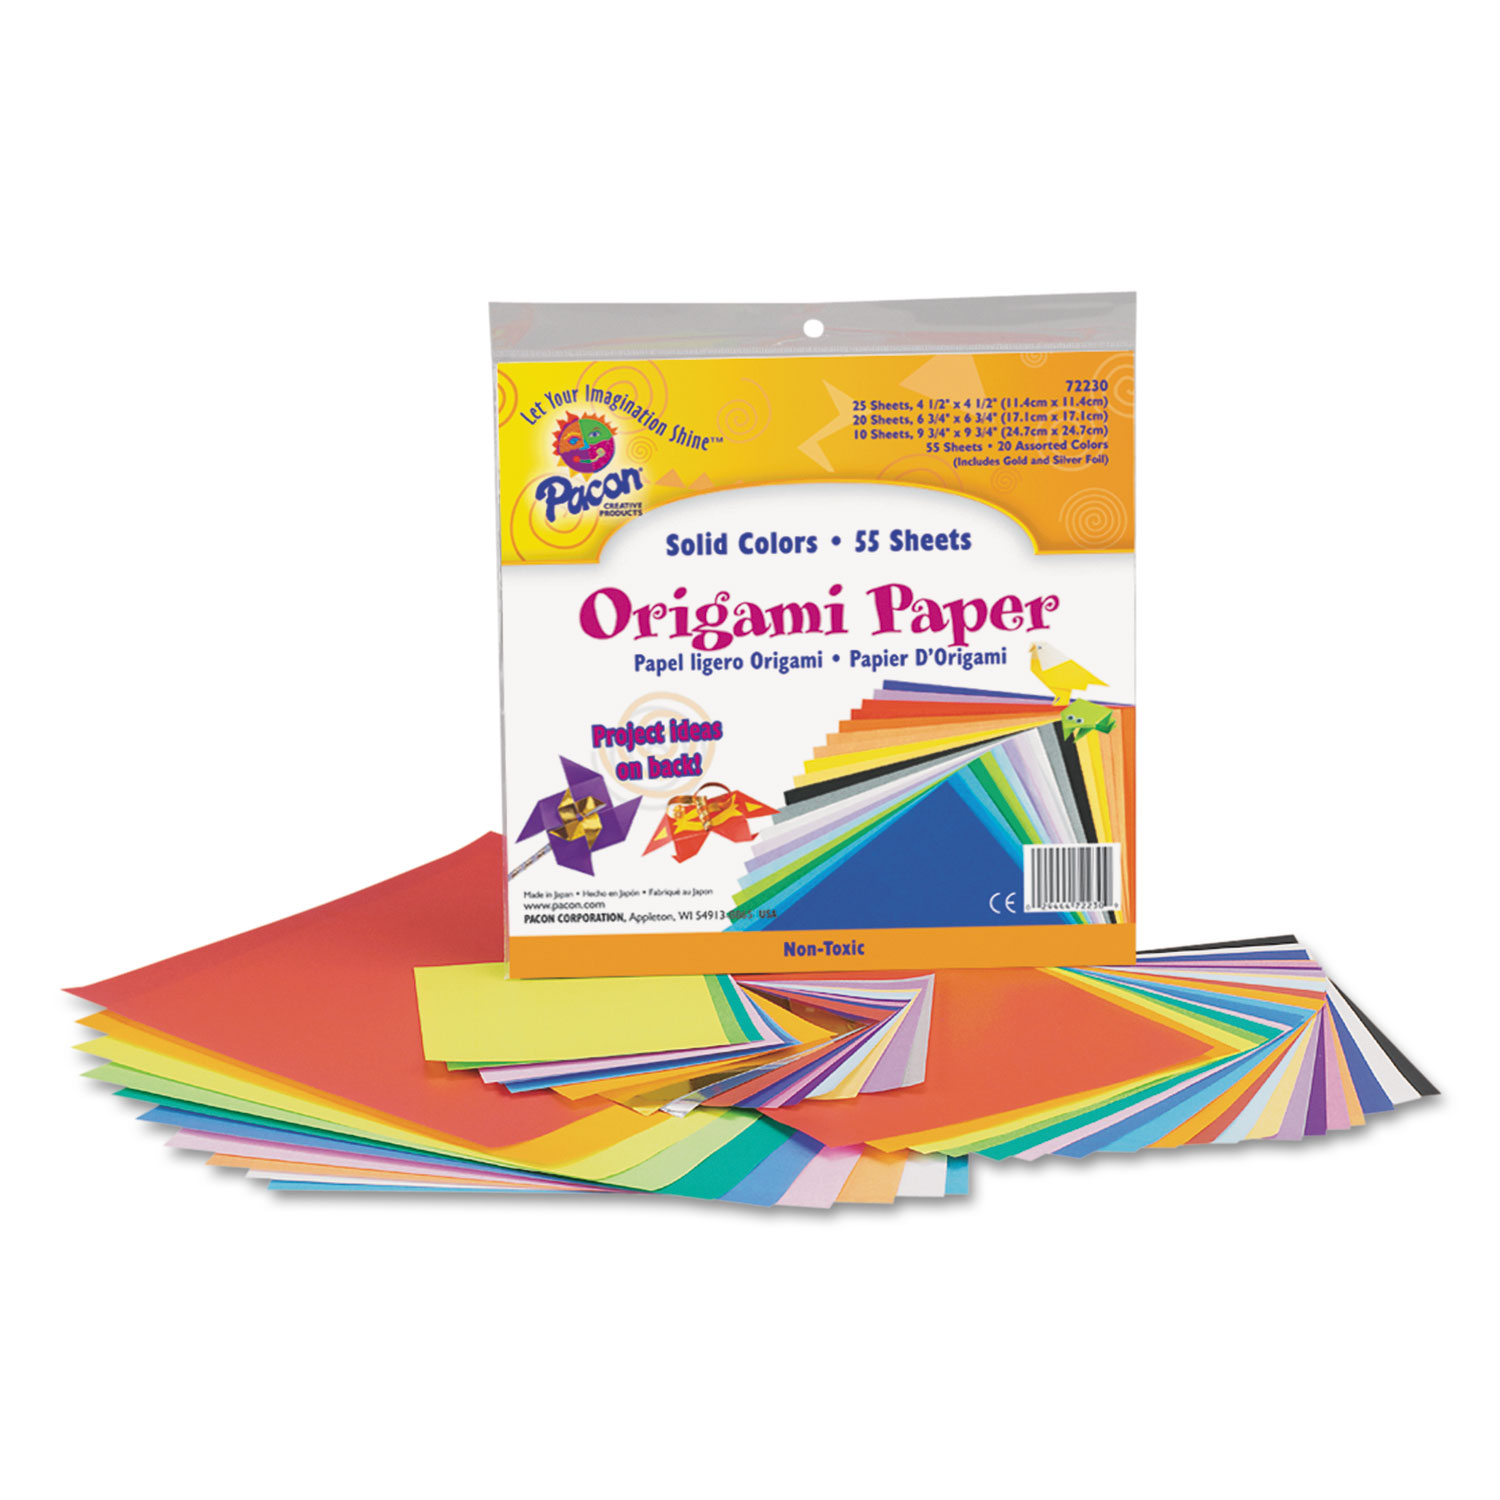 Origami Paper, 30 lbs., 9-3/4 x 9-3/4, Assorted Bright Colors, 55 Sheets/Pack